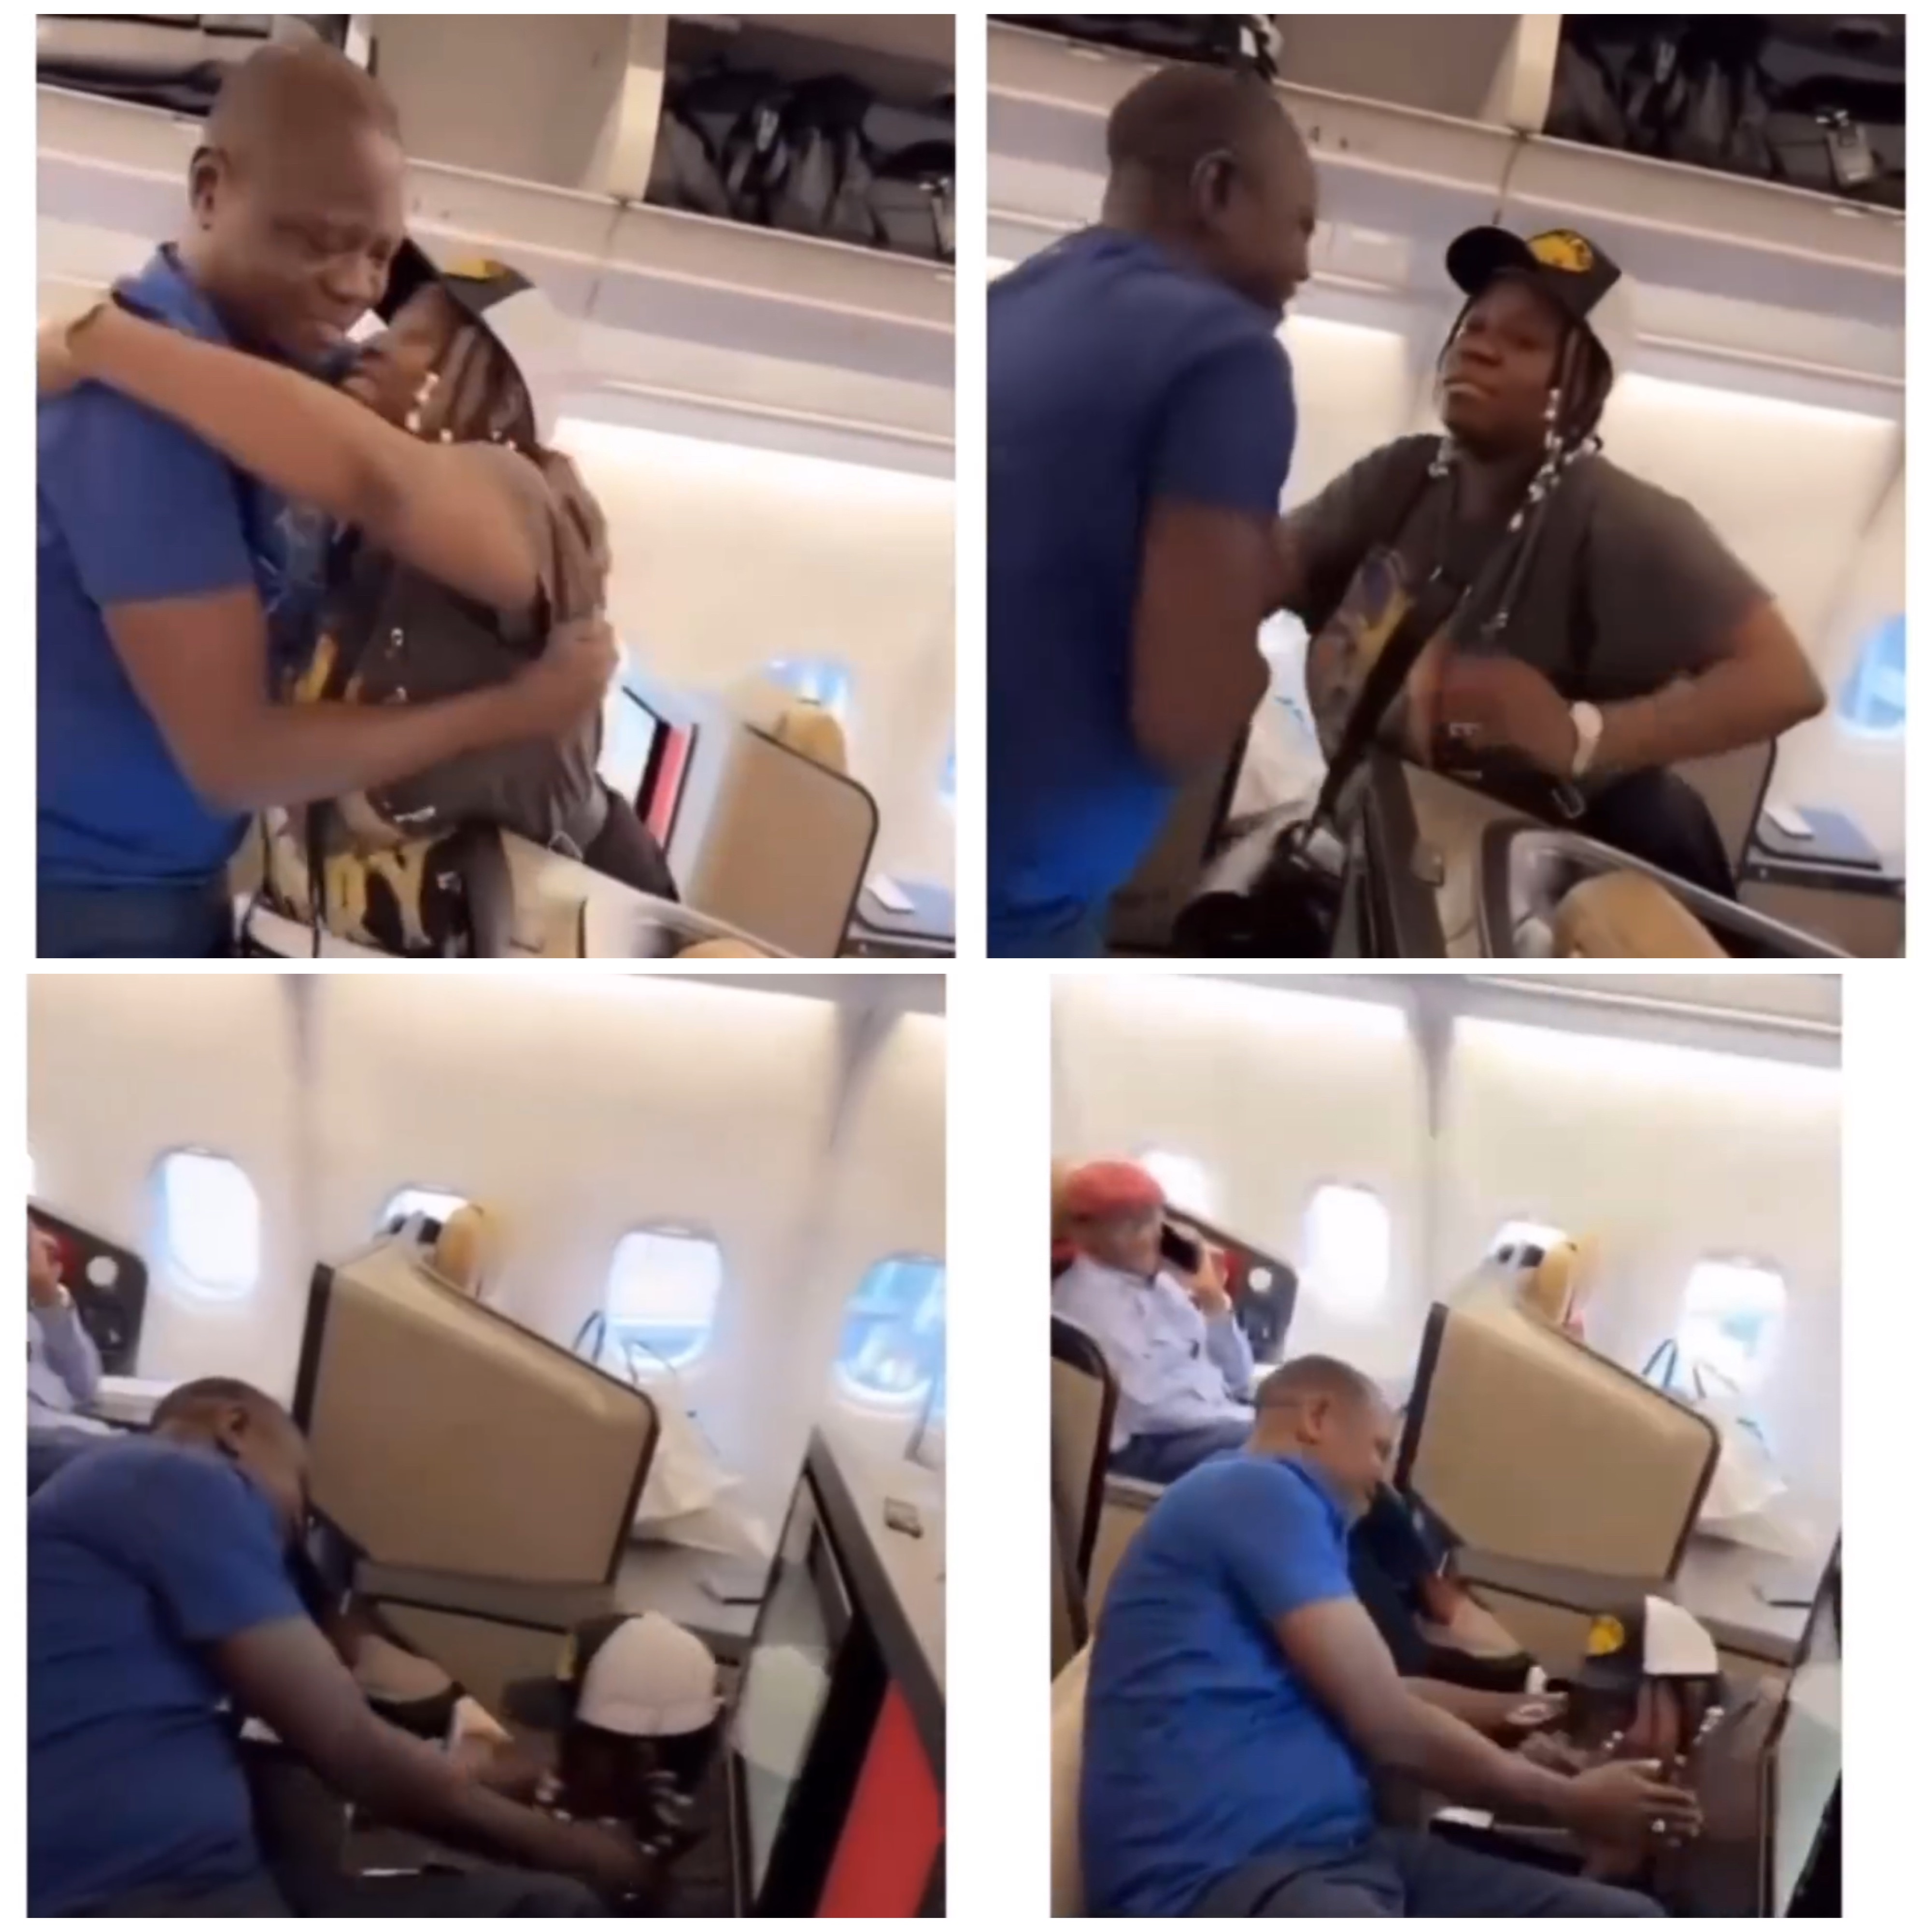 Singer Teni speaks after she was bashed for prostrating before socialite IBD Bende in an aircraft